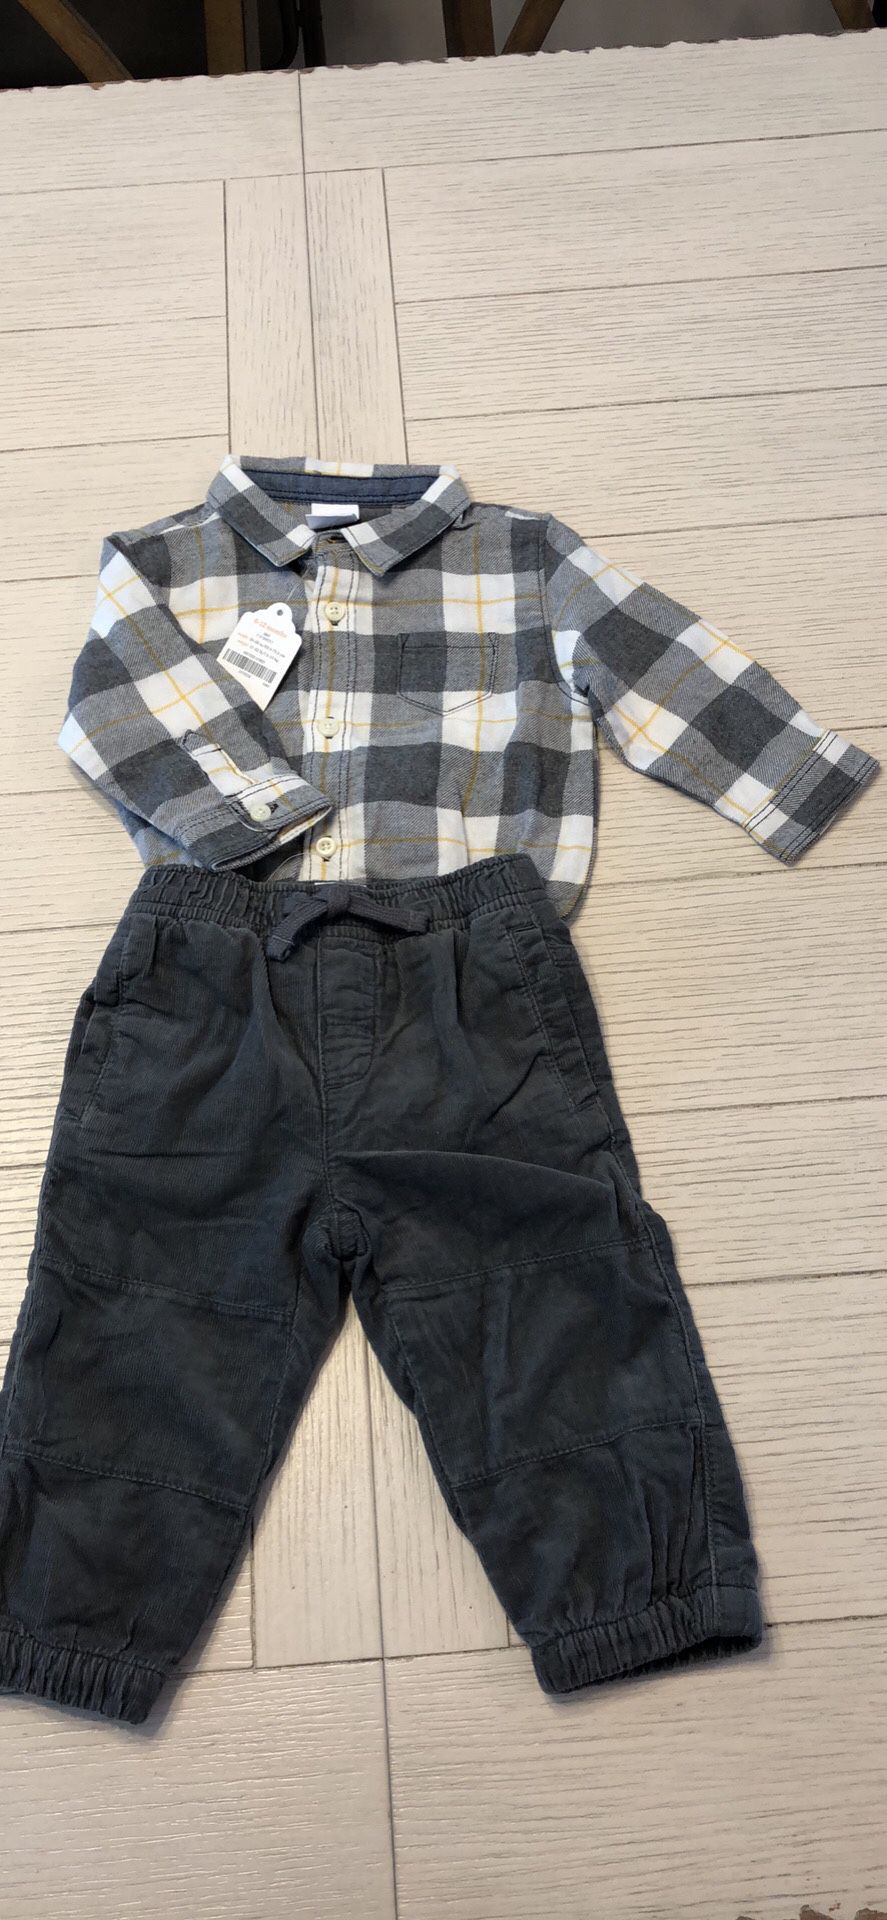 Brand New Gymboree Outfit $20 Size 6-12 Months 